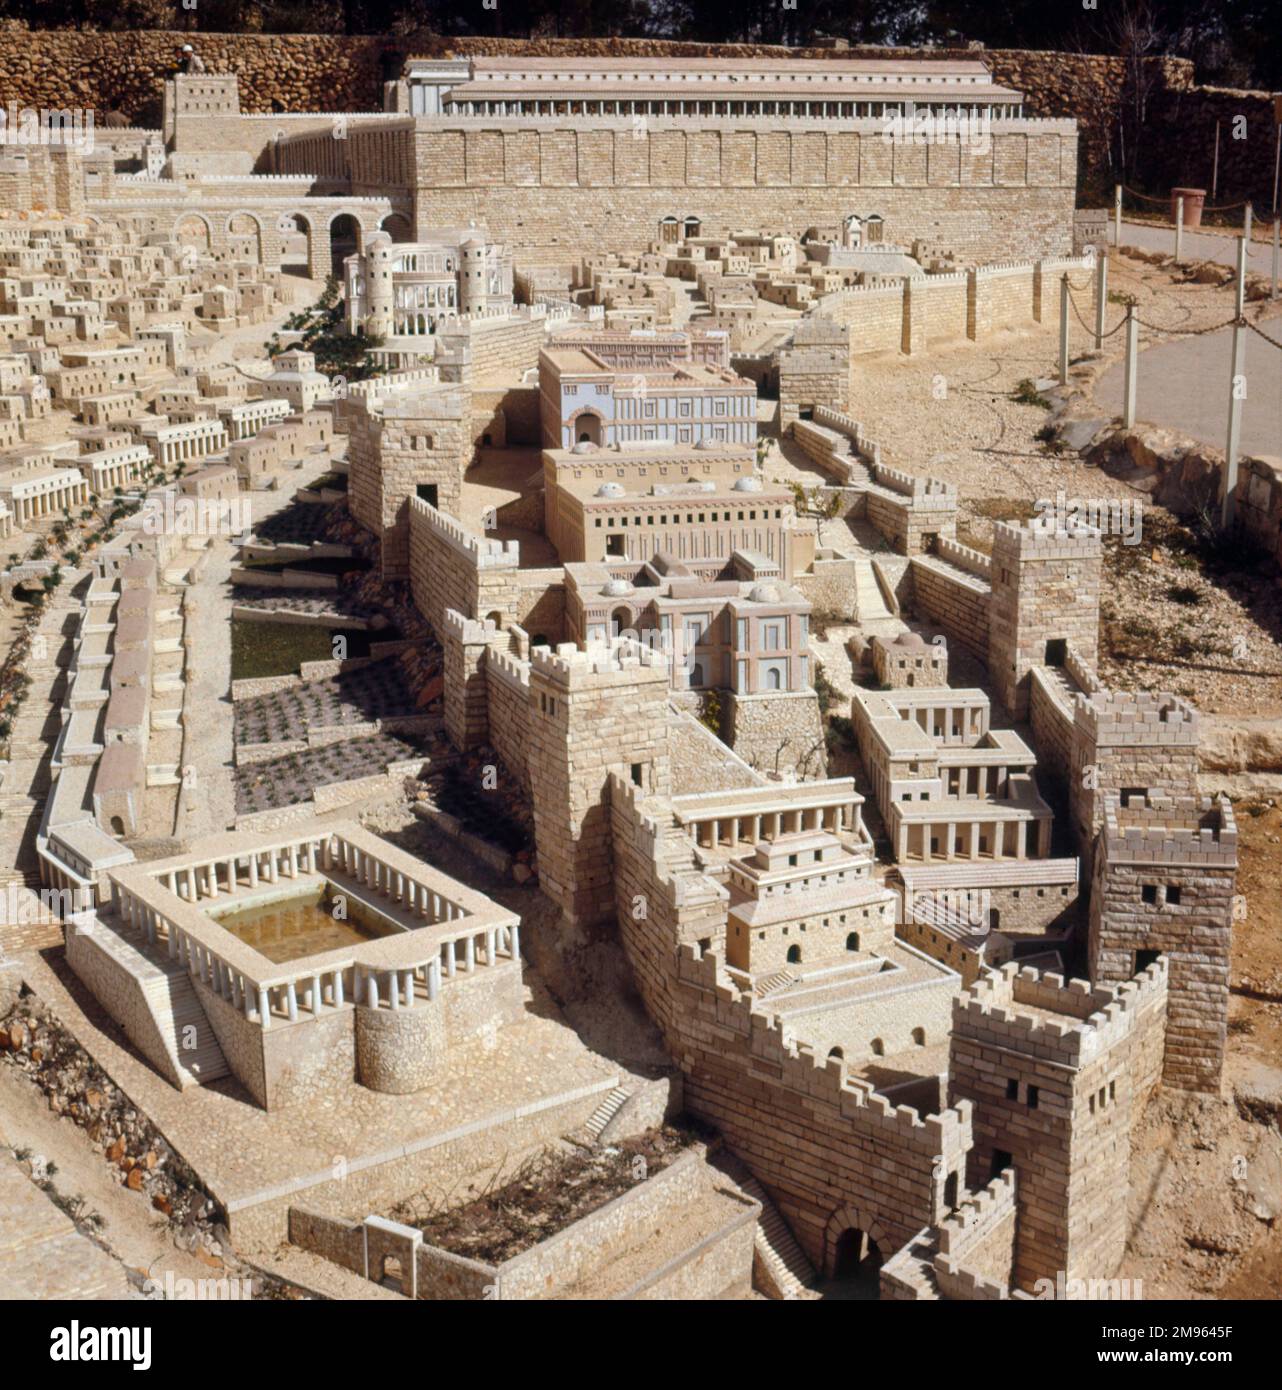 A reconstruction of JERUSALEM at the time of the second temple before the town was ransacked by the Romans. The model was made between 1964 and 1967 by Hans Kroch. Stock Photo